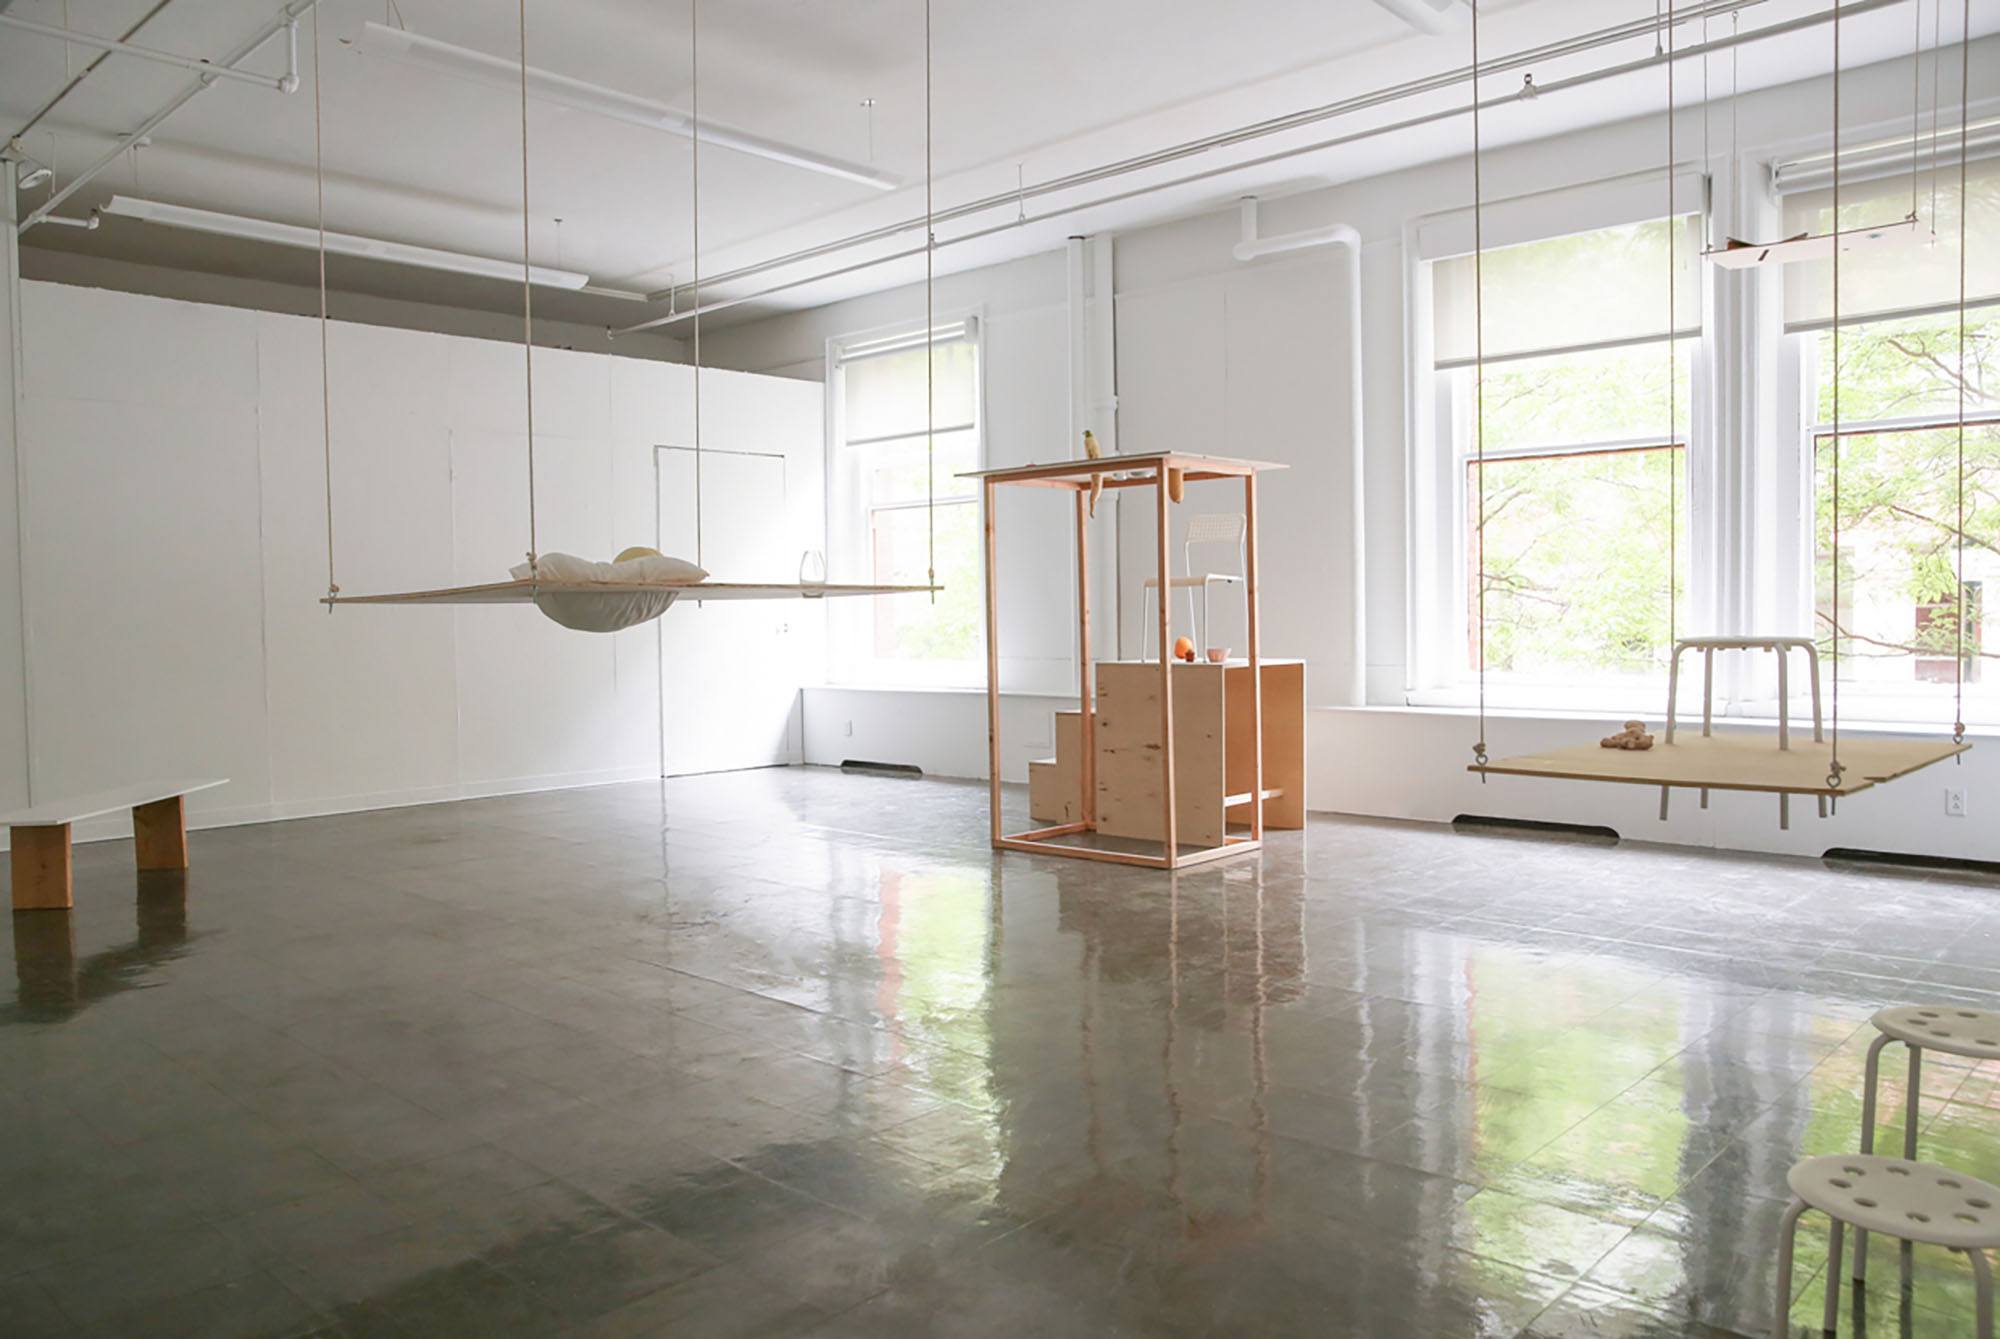 An installation view of suspended and constructed wood surfaces with objects cutting through them